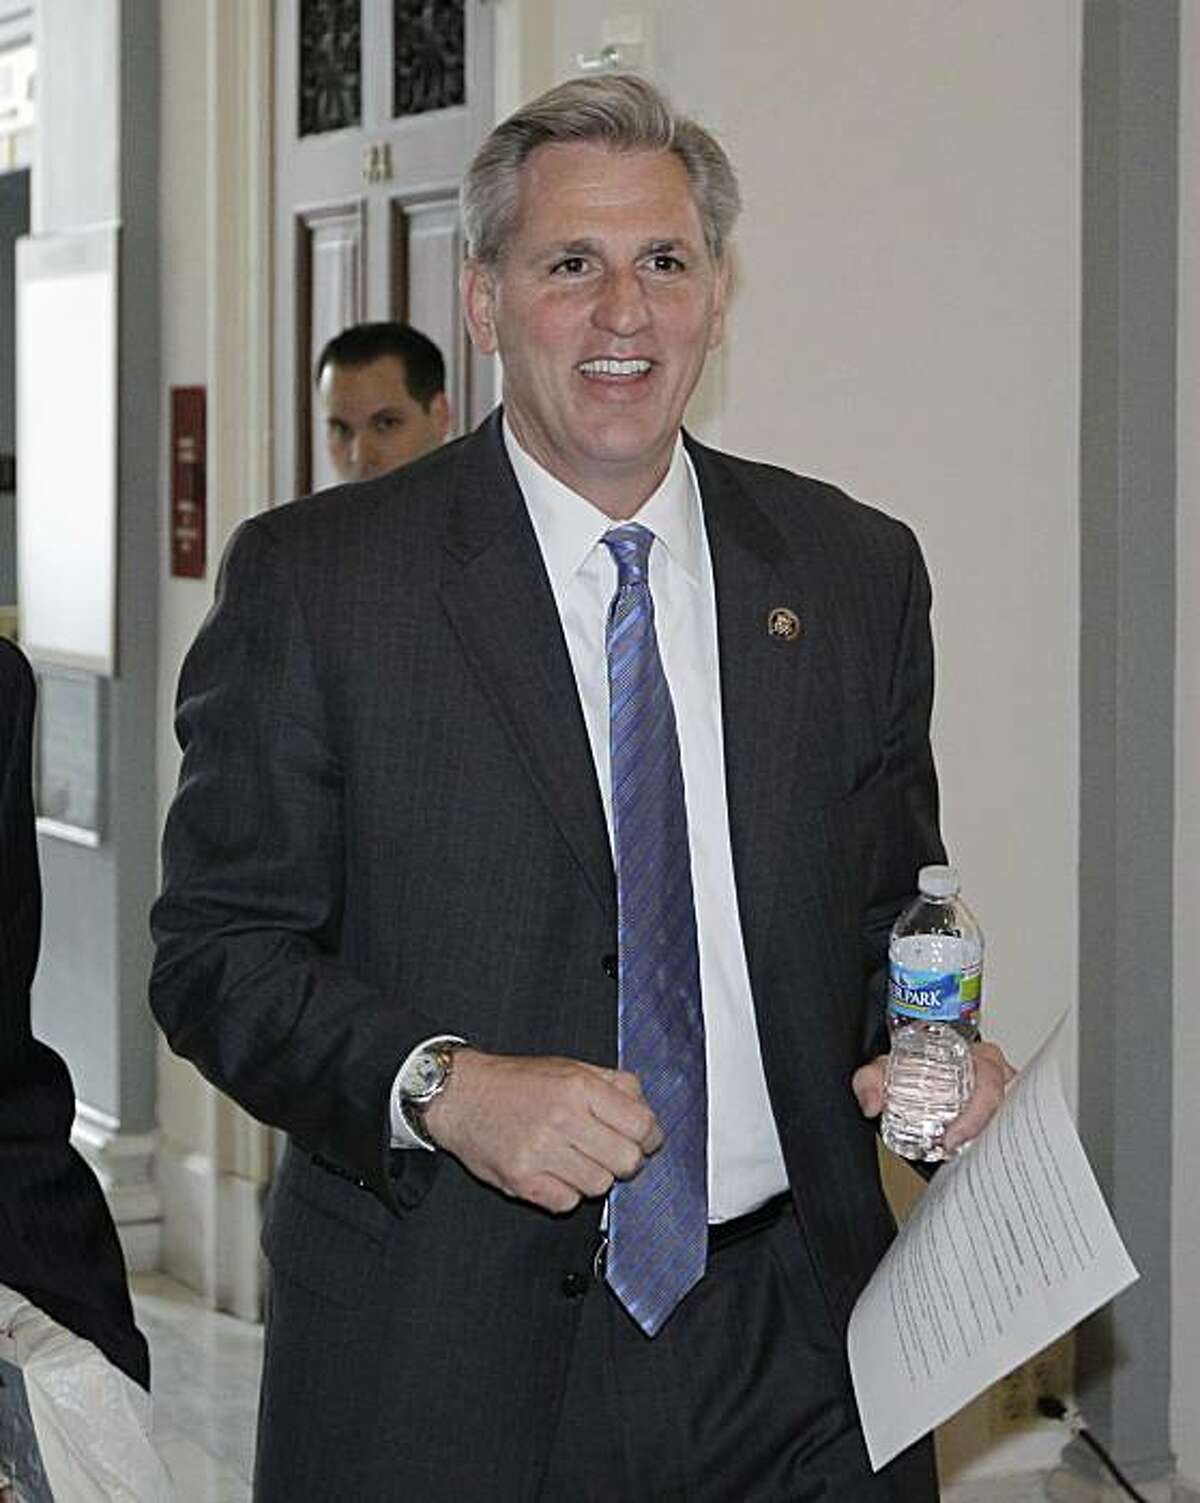 Incoming House Majority Whip Kevin McCarthy of Calif. arrives for a closed GOP conference on Capitol Hill in Washington, Tuesday, Jan. 4, 2011.